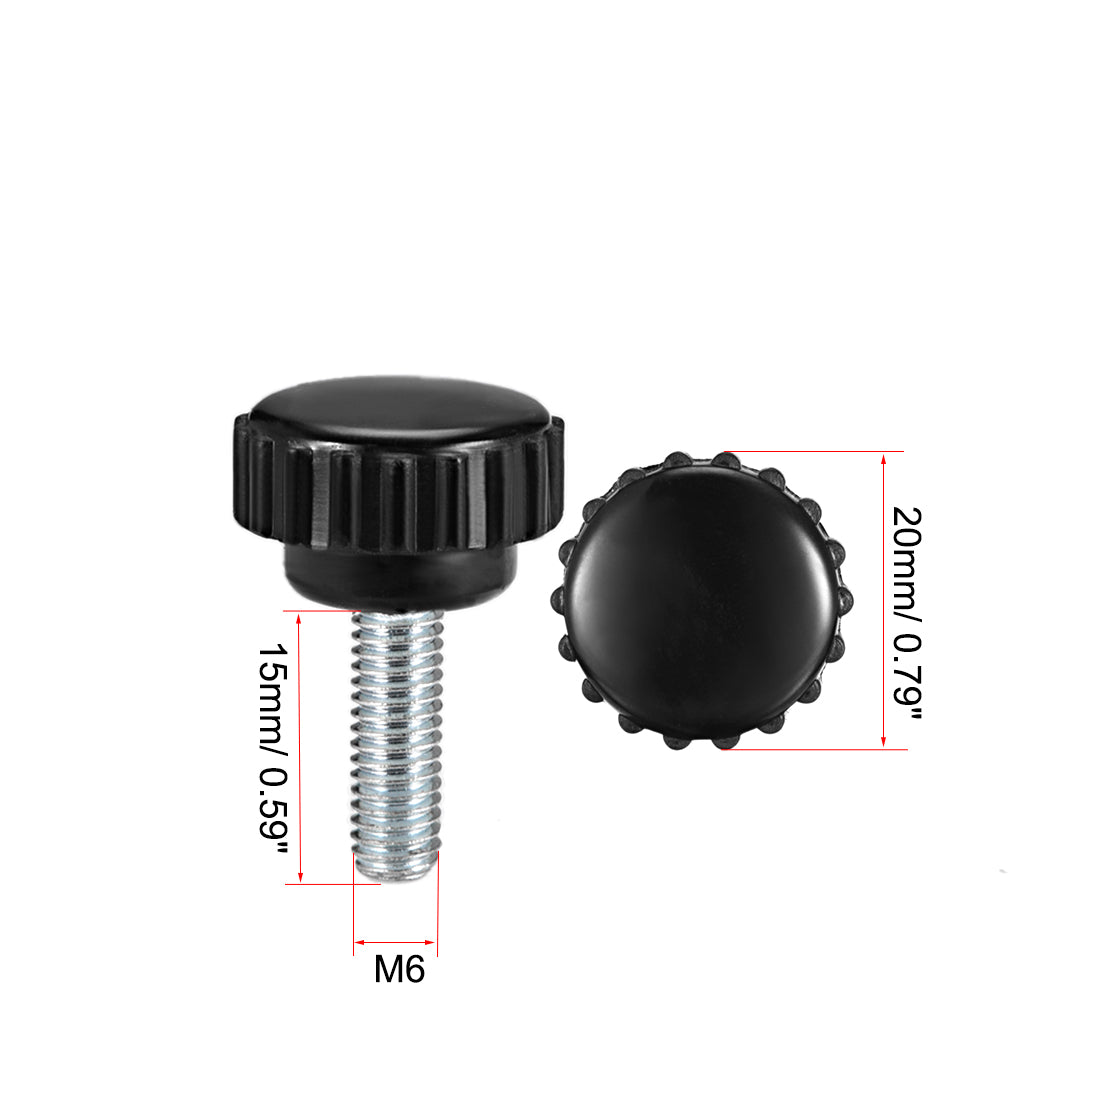 Uxcell Uxcell M4 x 14mm Male Thread Knurled Clamping Knobs Grip Thumb Screw on Type  9 Pcs